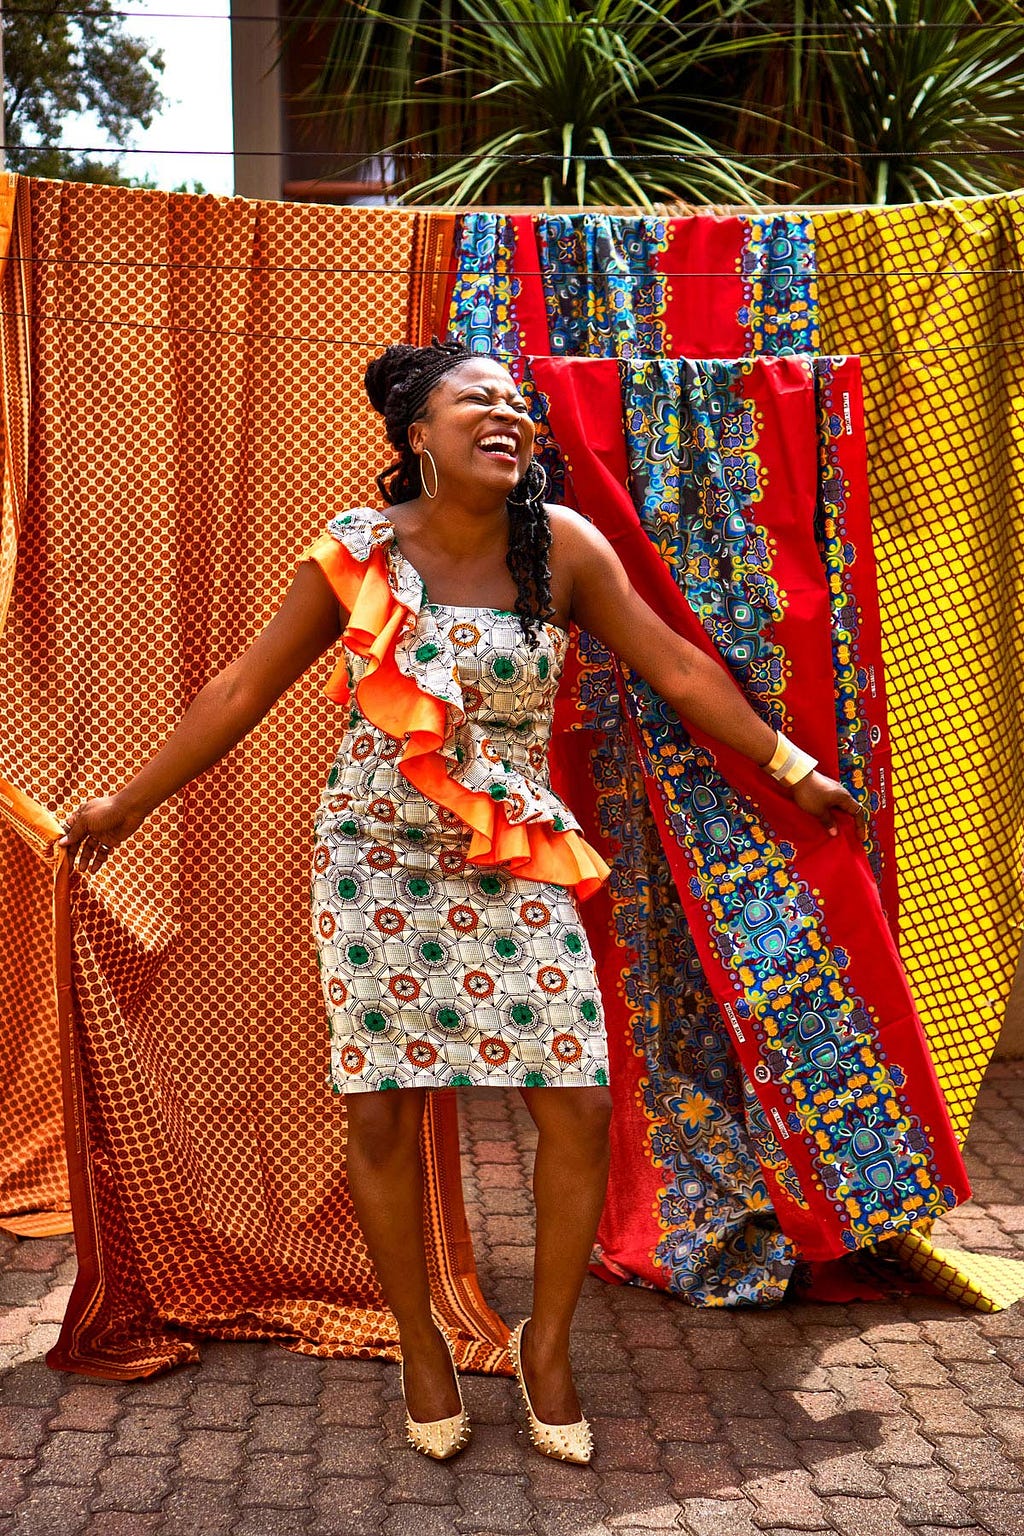 Victoria Adasonla, wearing a colorful traditional kaftan, stands in front of an array of traditional African fabrics.